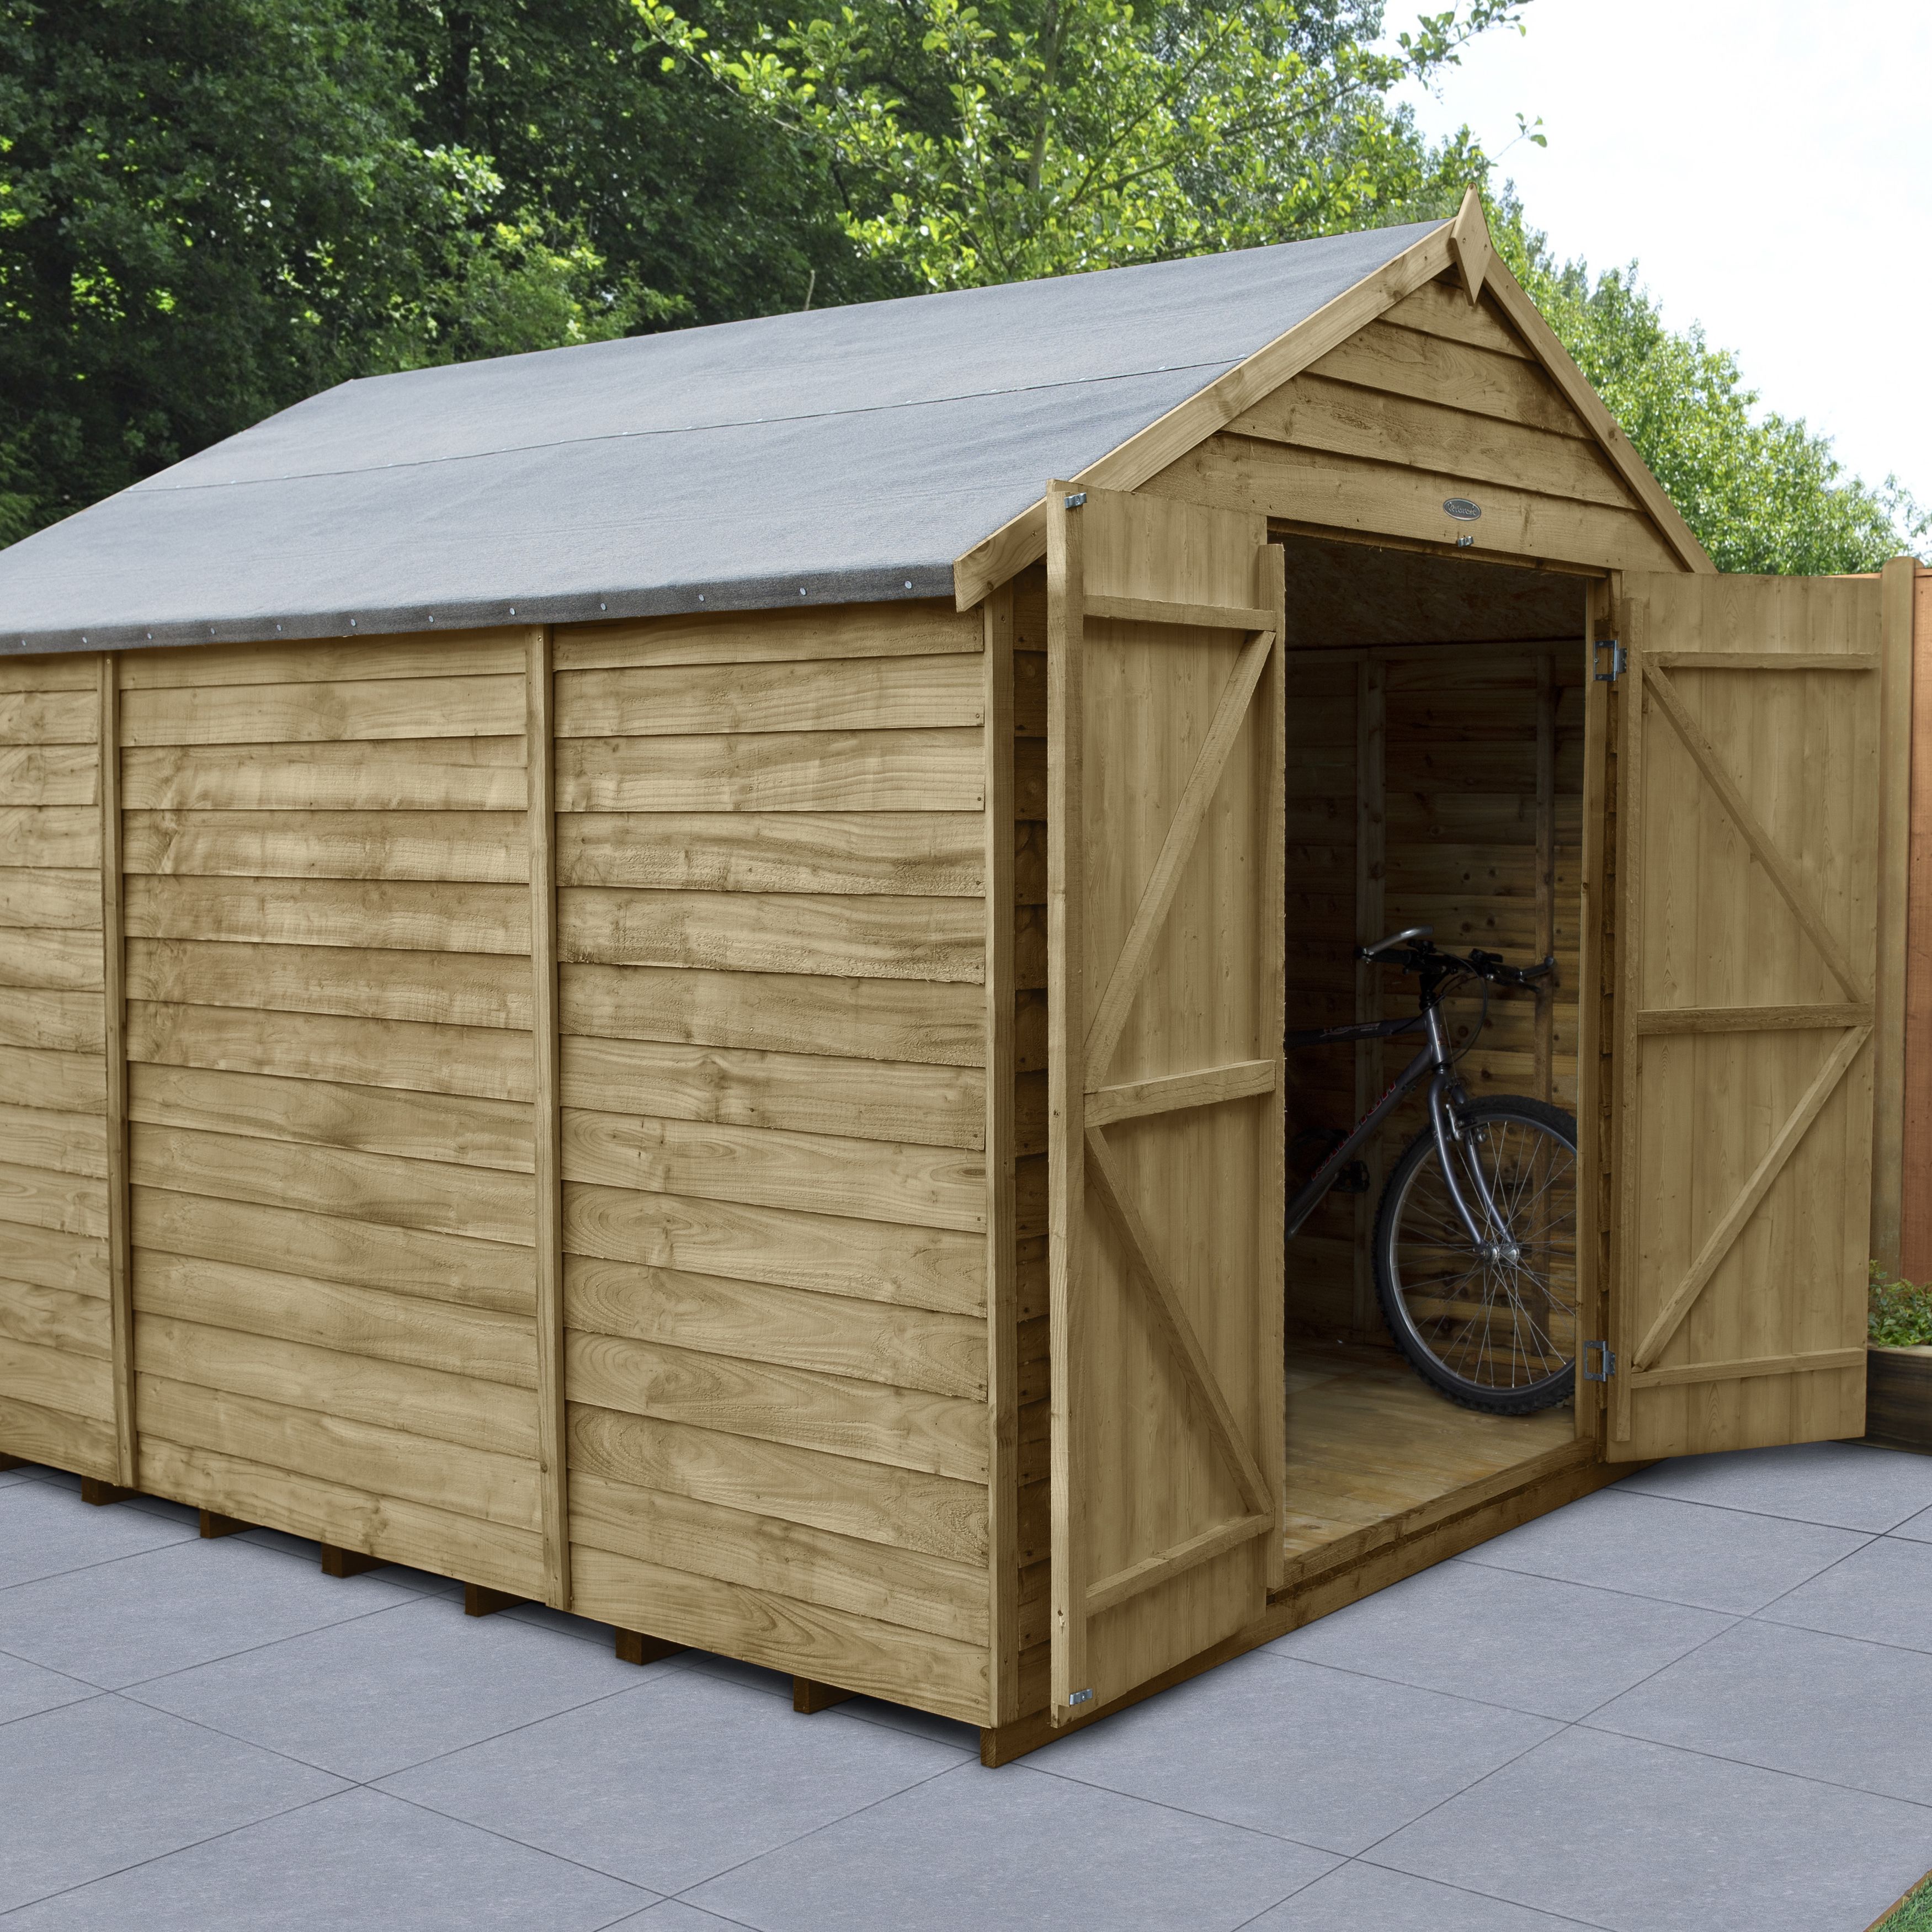 Forest Garden 10X8 Ft Apex Overlap Wooden Shed With Floor - Assembly Service Included